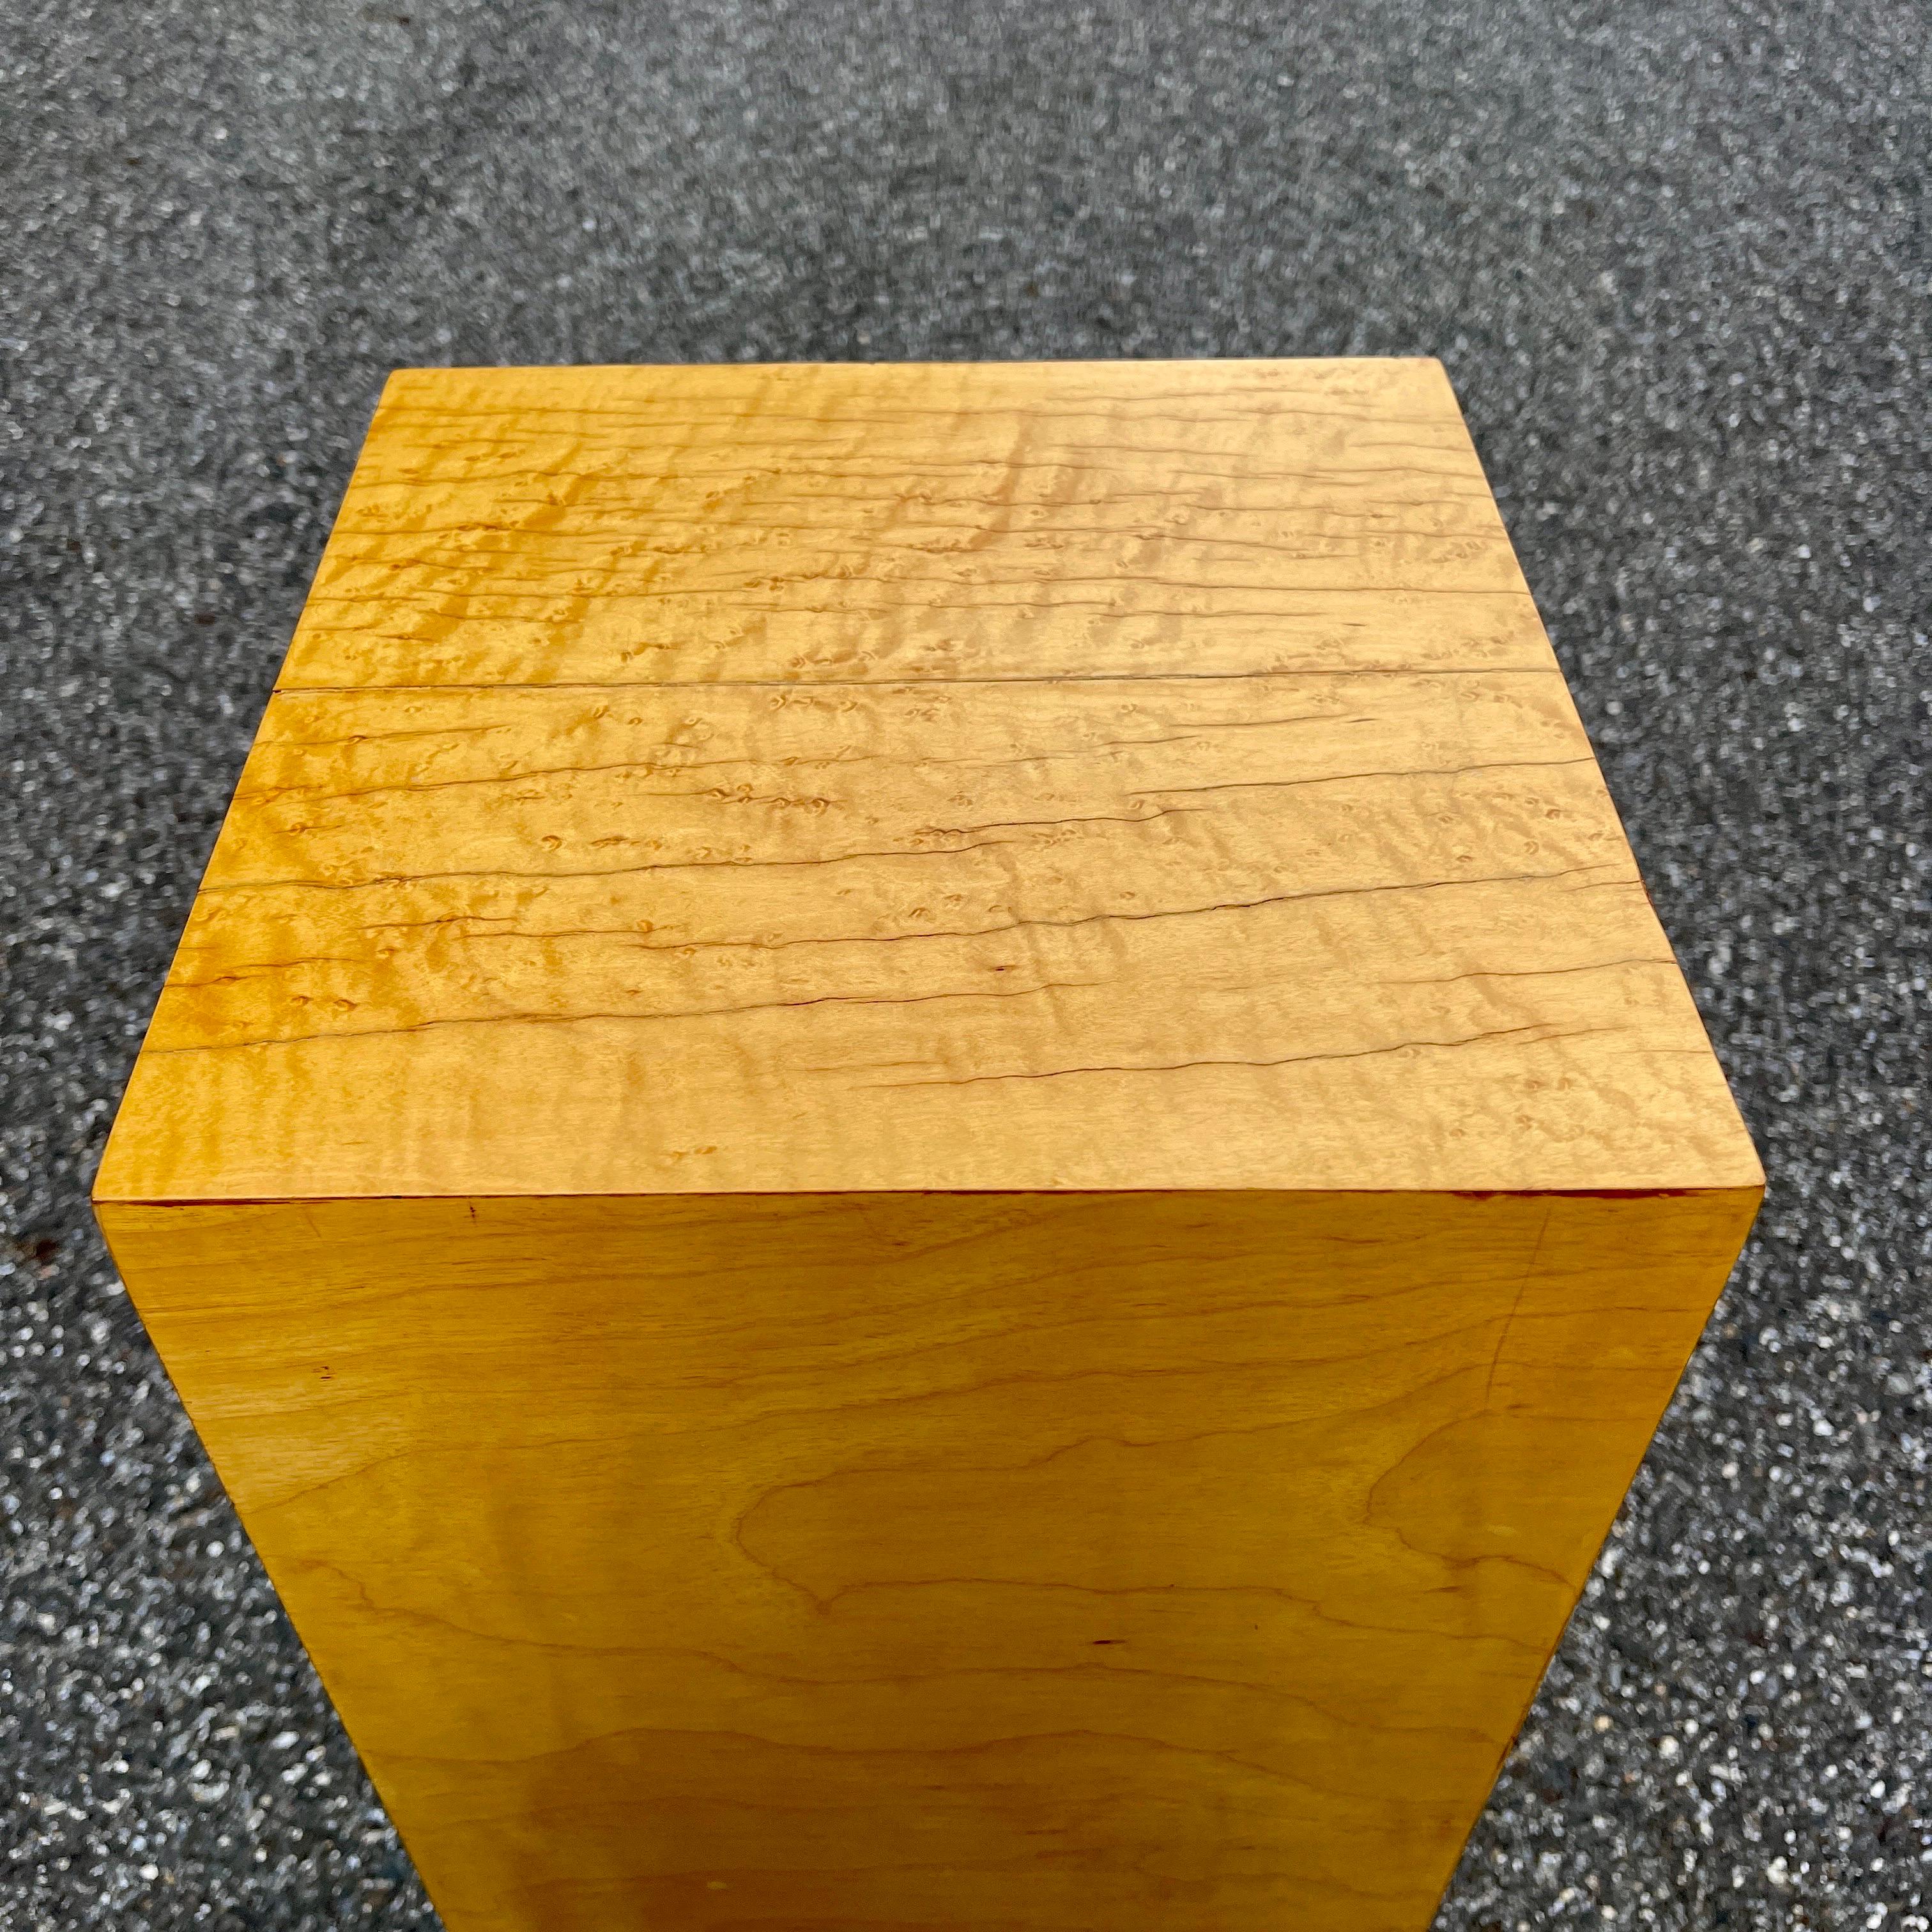 Late 20th Century Light Colored Veneer Wood Pedestal For Sale 5